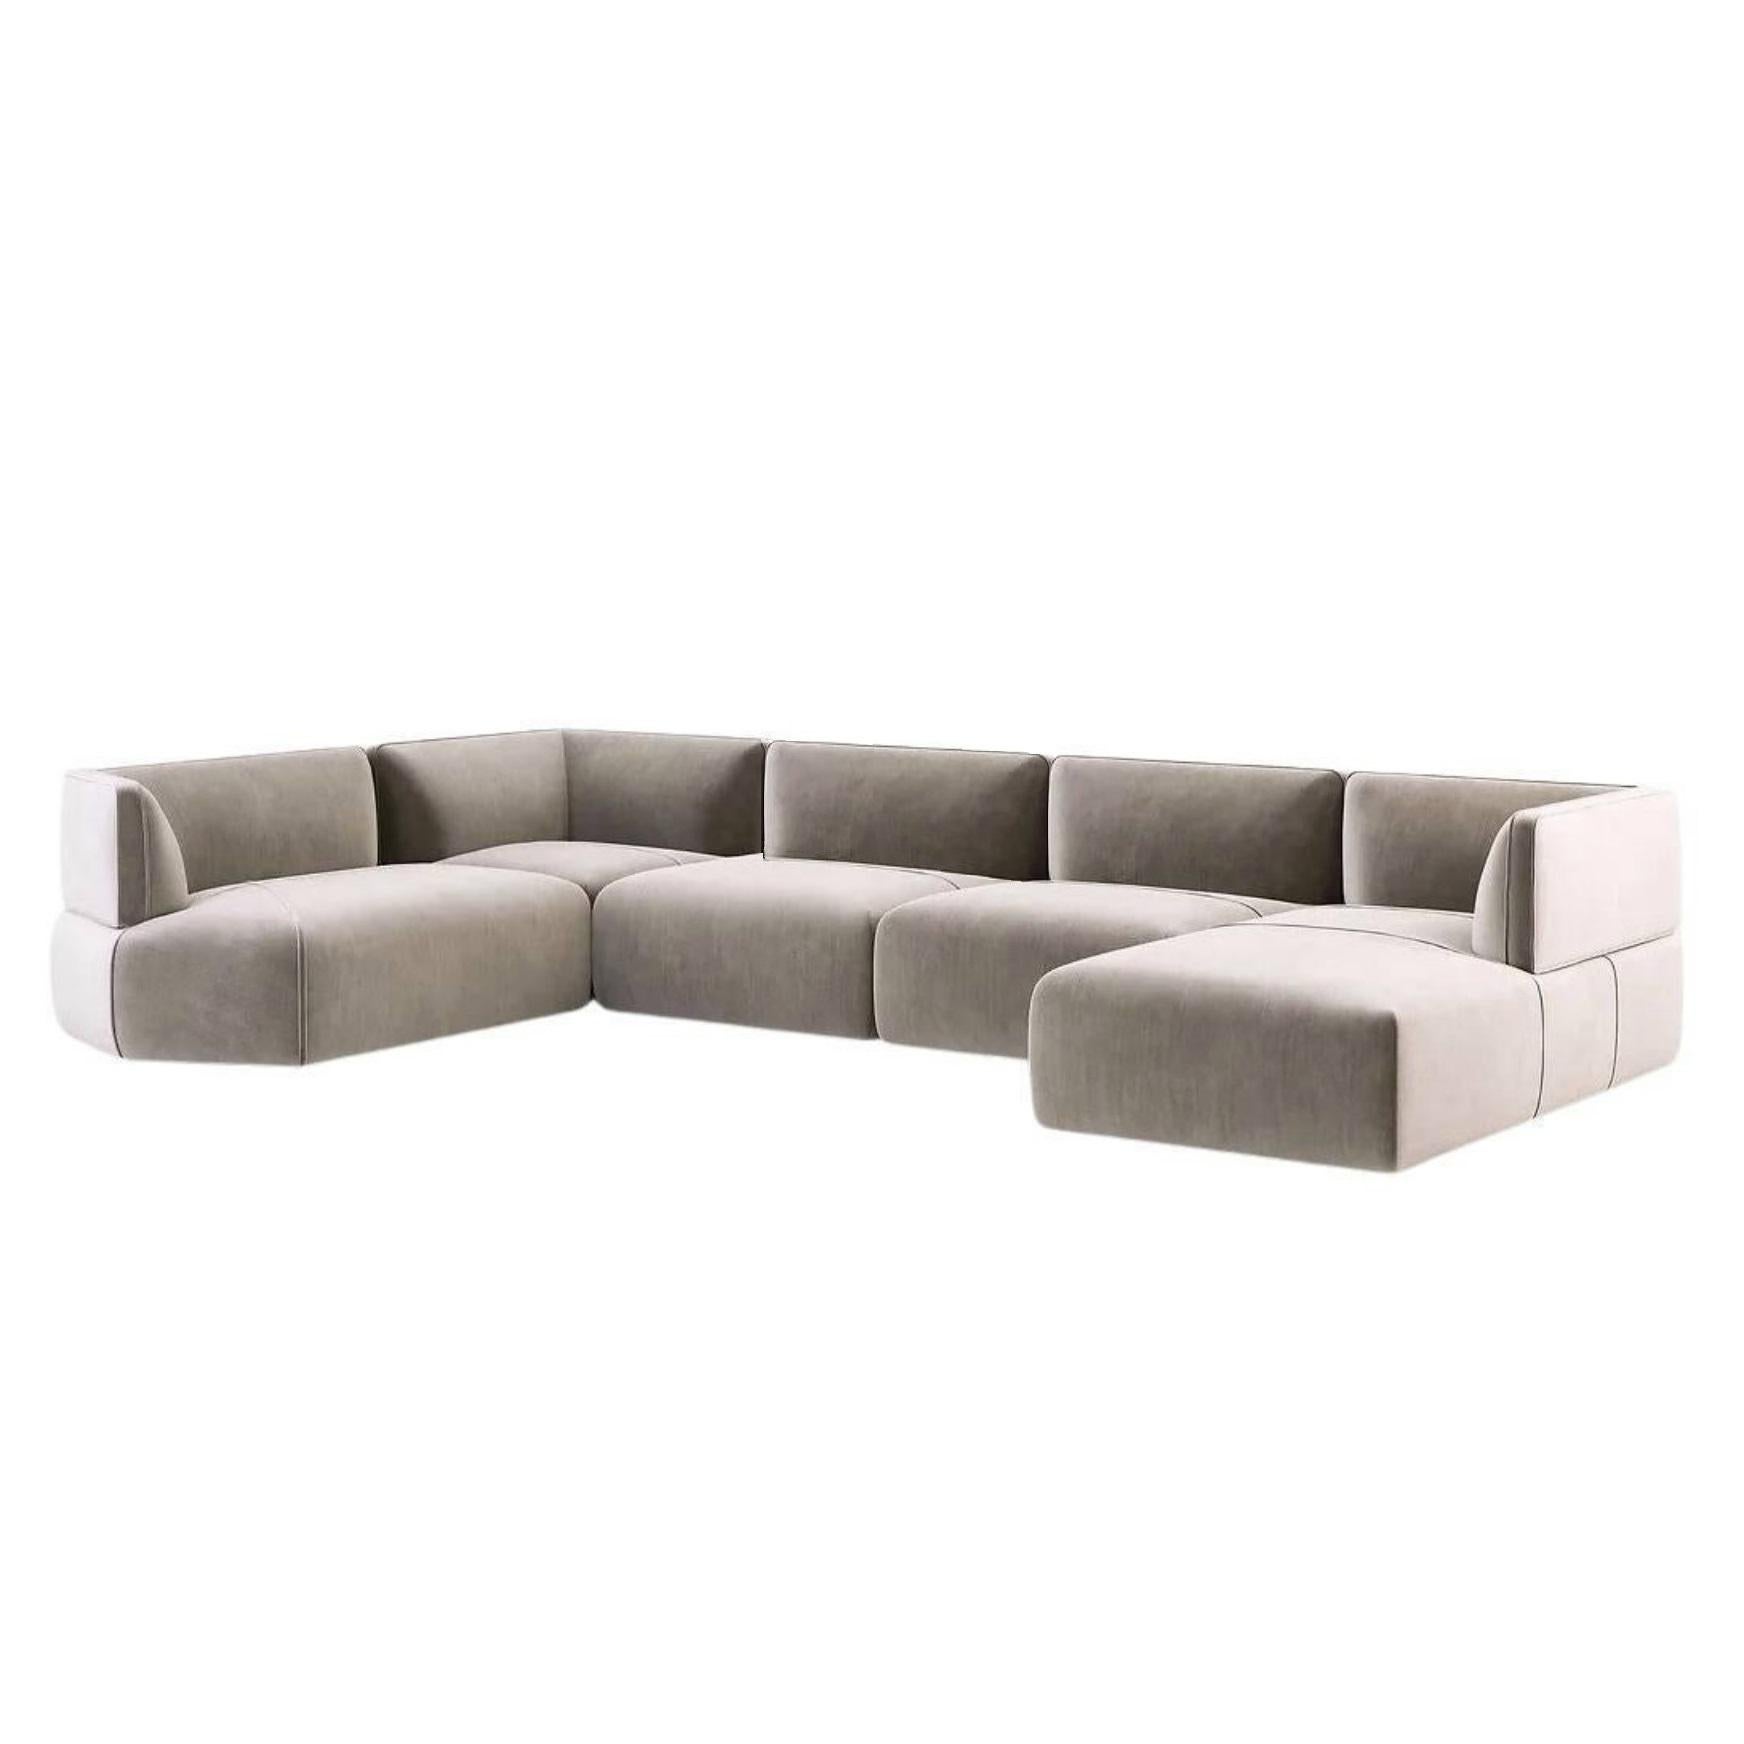 Tailor made and fully upholstered sectional sofa offered in a selection of luxurious, velvet fabrics.
Shown with taupe cotton velvet. All hardwood frame with advanced comfort spring suspension. The seat and back cushions filled with premium